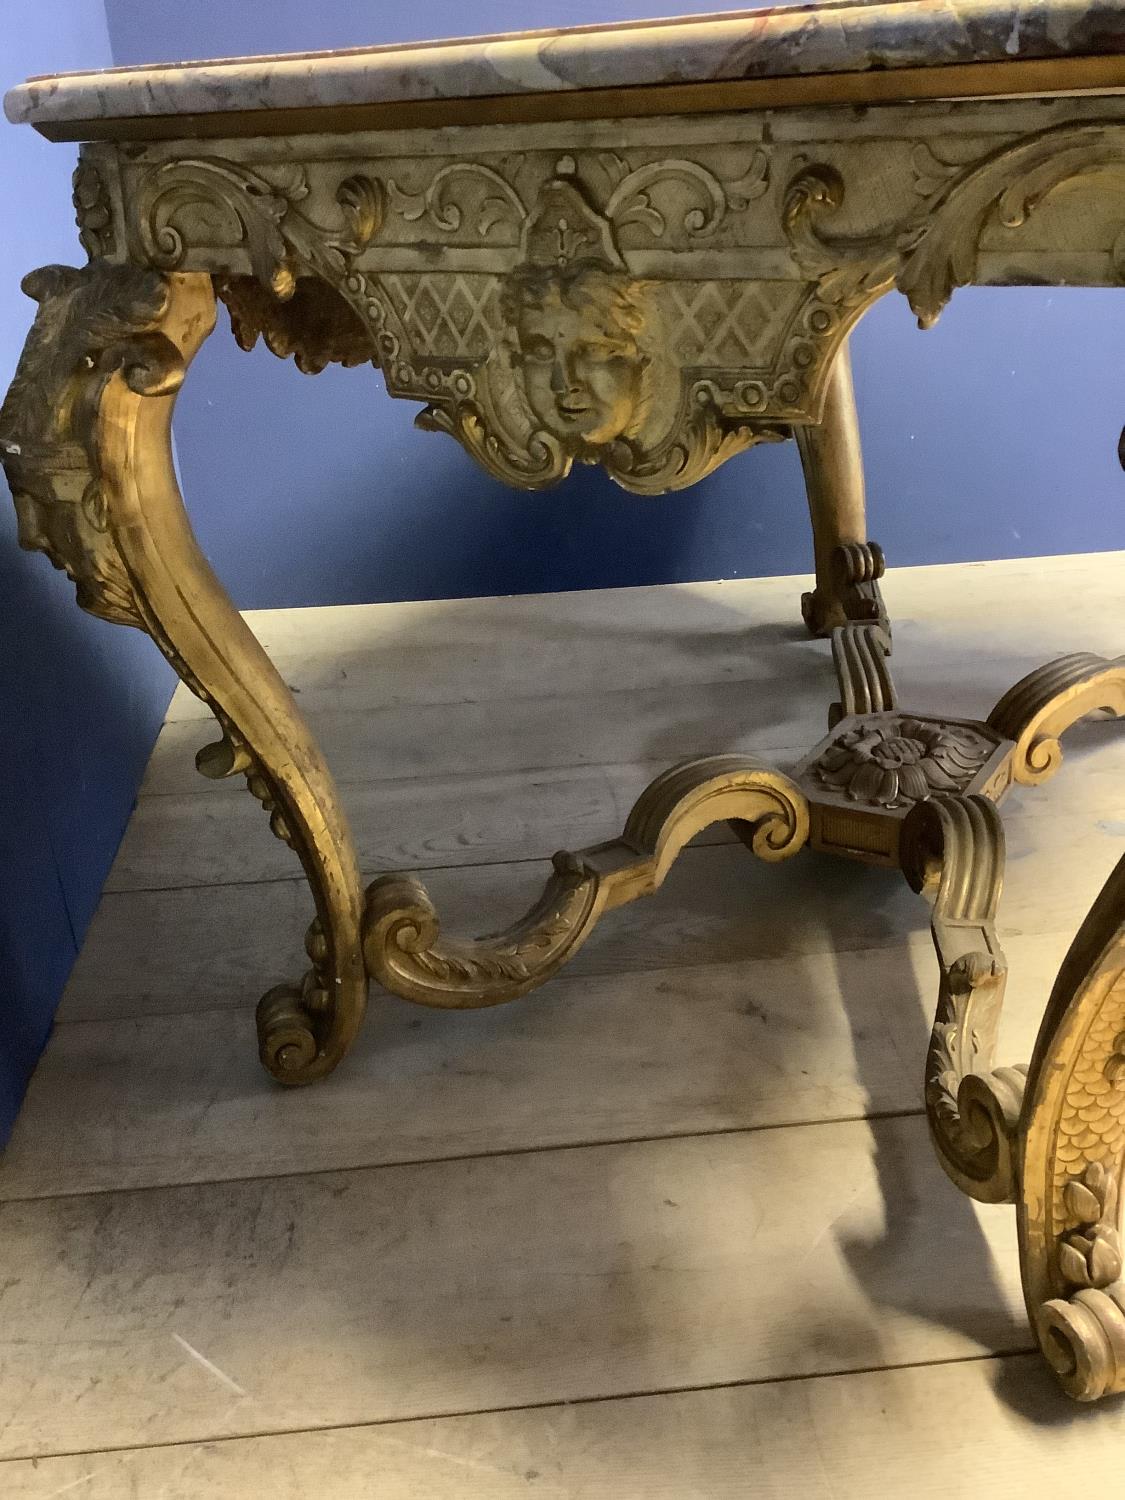 Early C18th/C19th giltwood side table in the manor of William Kent, elaborately carved & gilded unde - Image 11 of 12